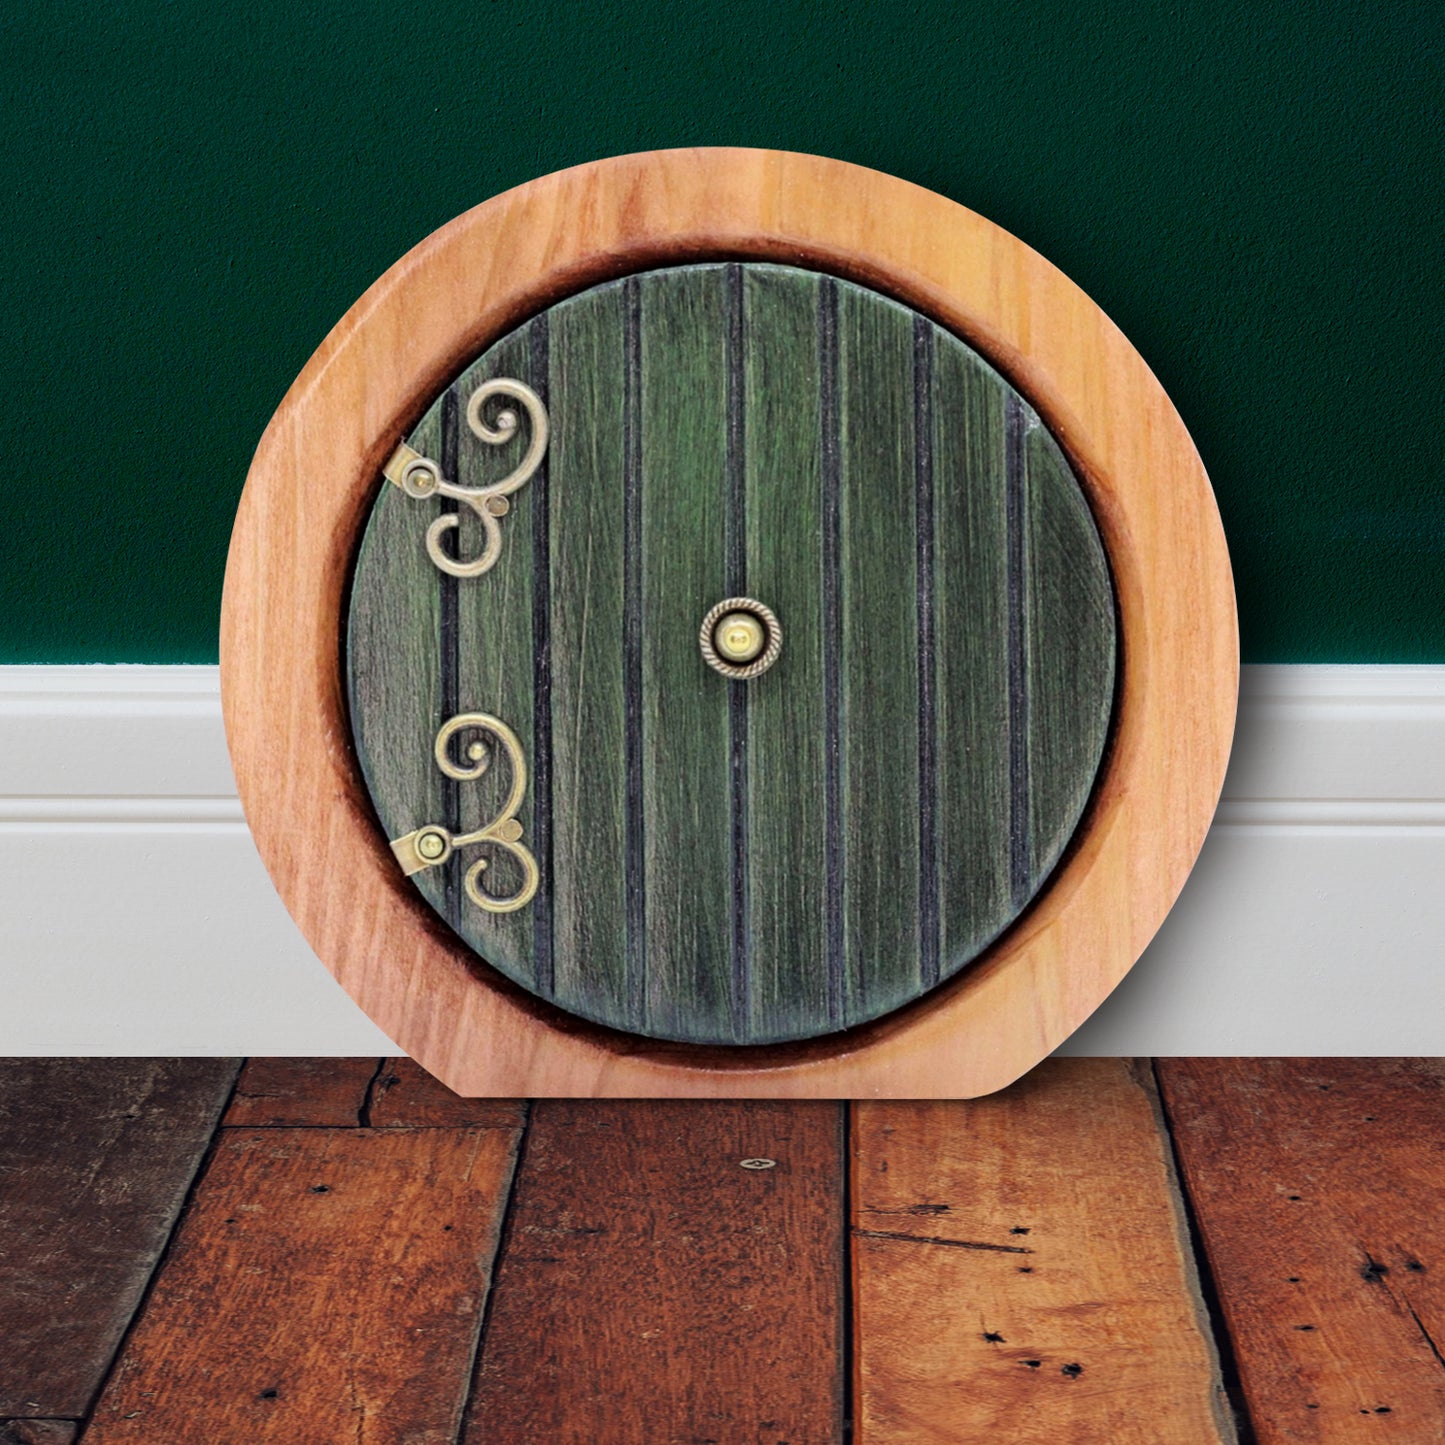 A round wooden doorframe with a green door on a wooden floor, against a white baseboard and green wall. The door has ornate brass hinges at the side, and a brass doorknob in the center. 